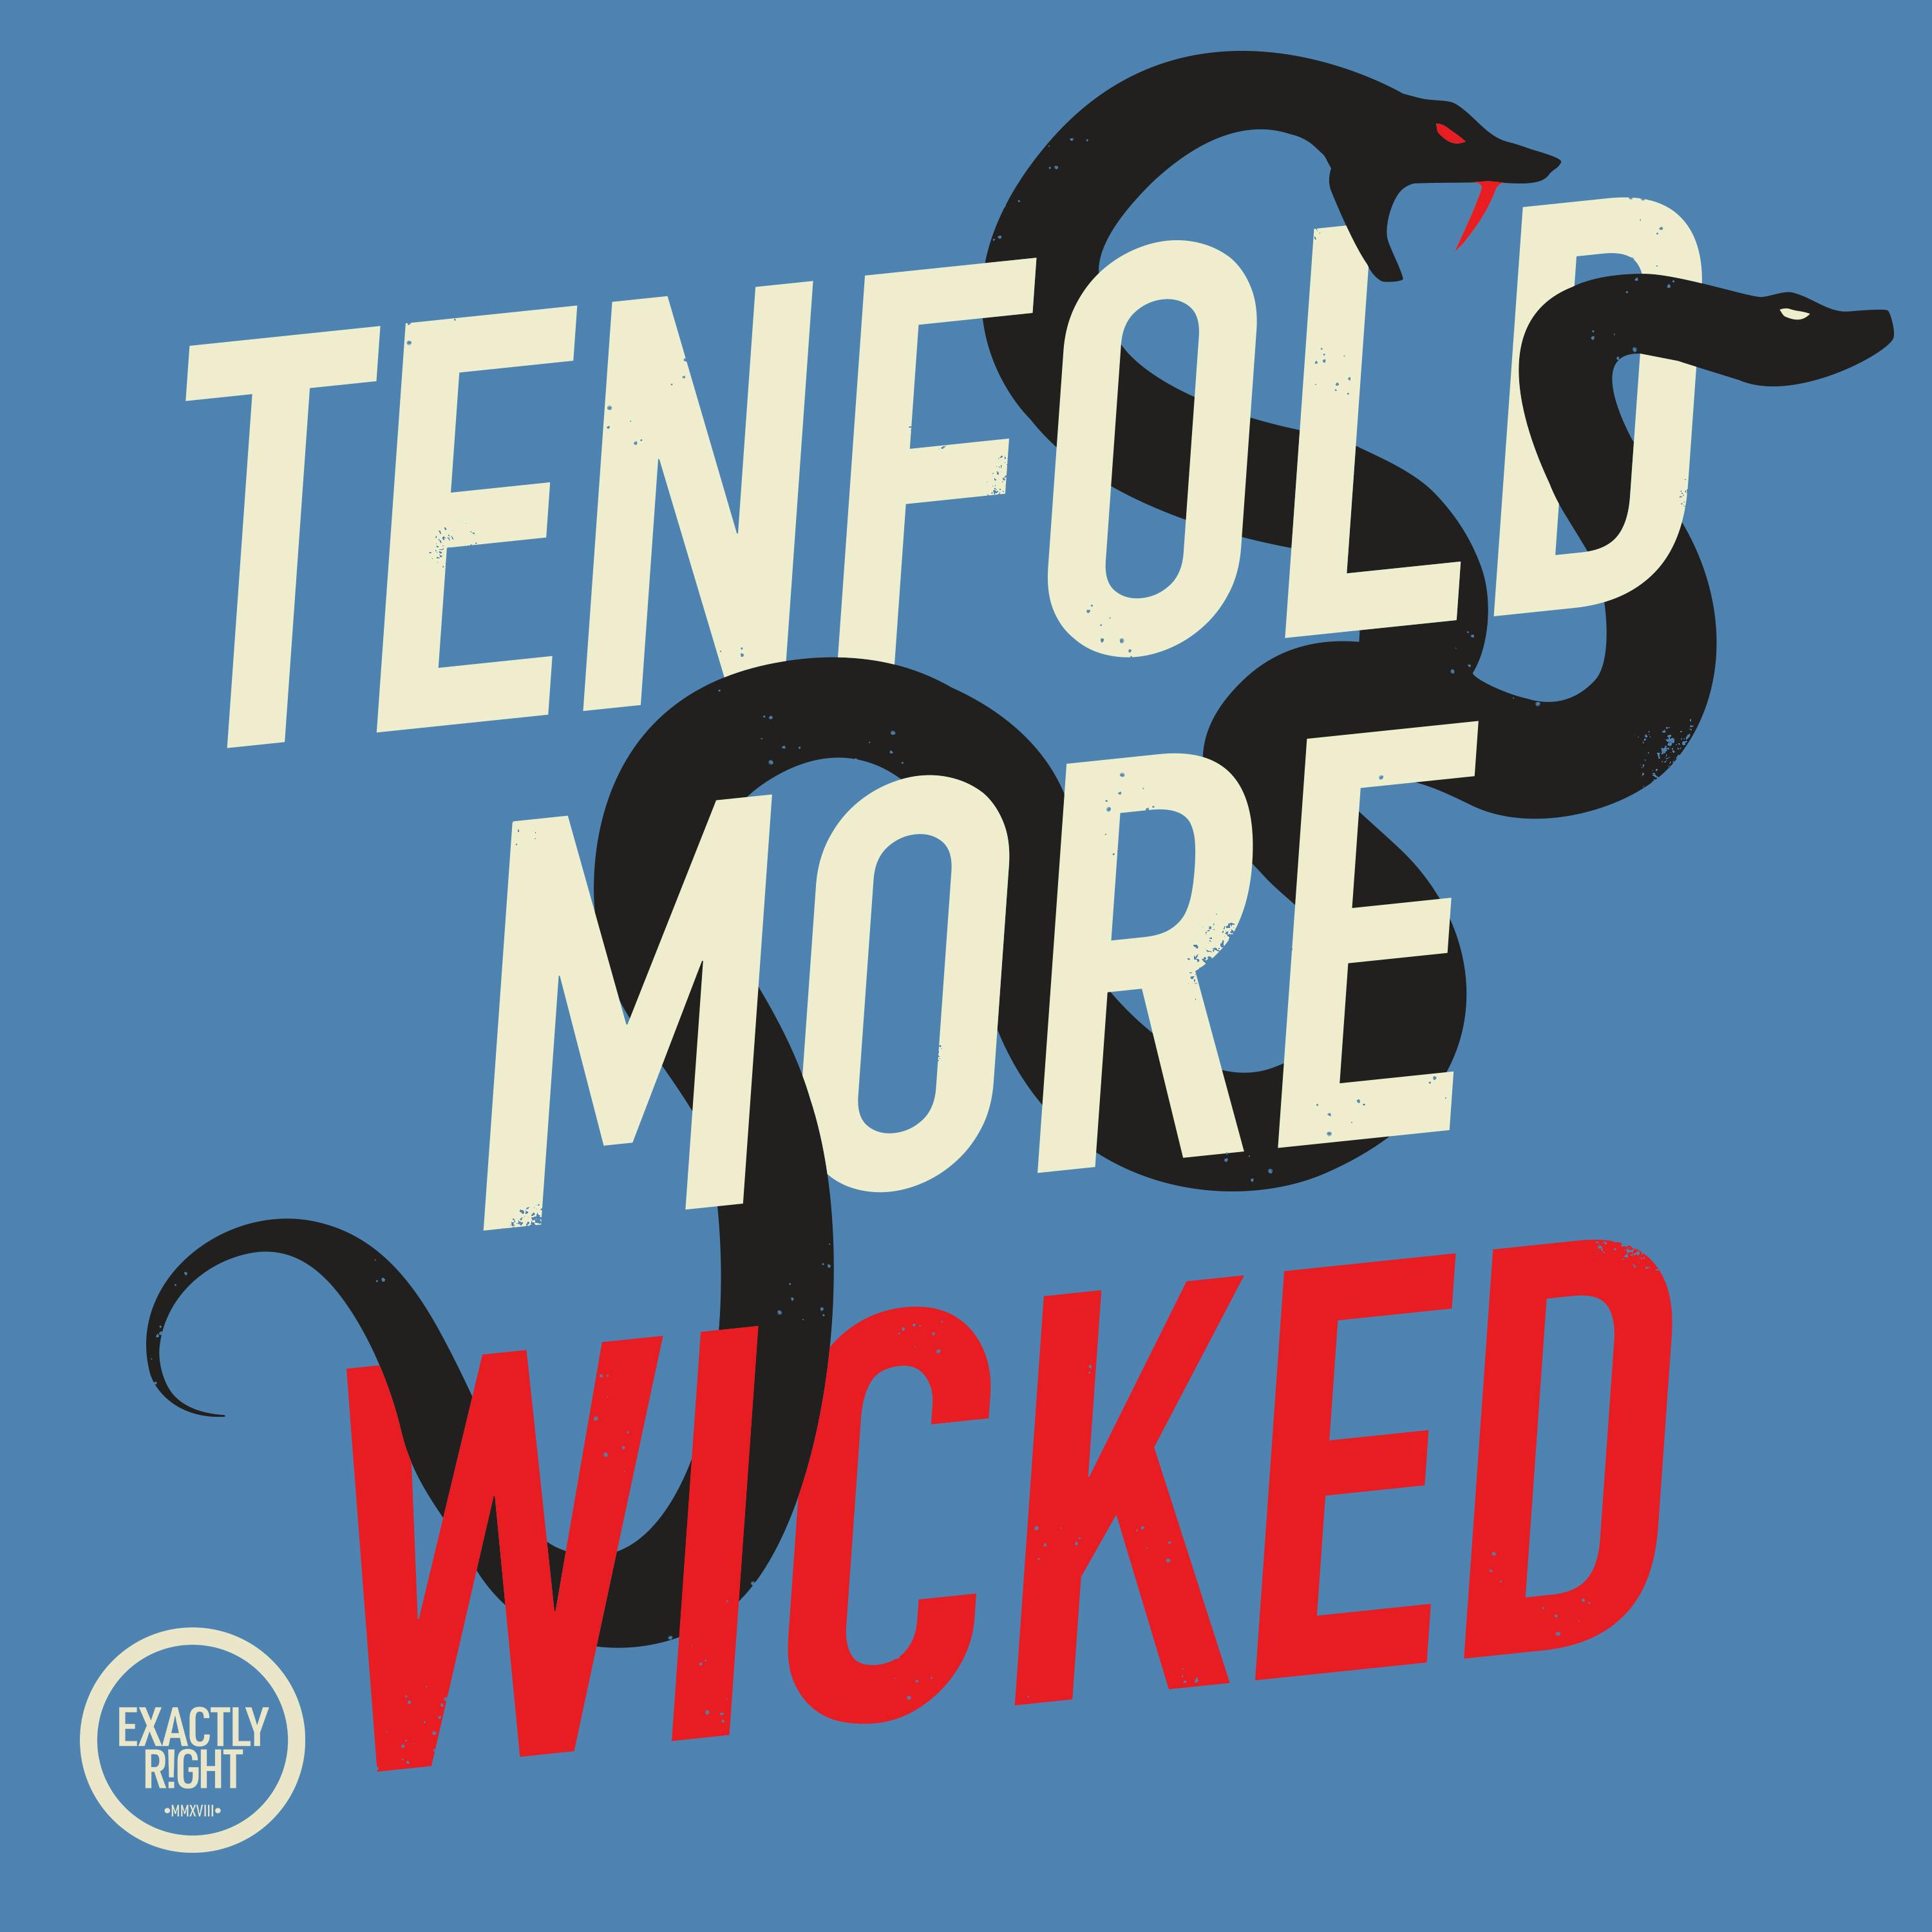 Tenfold More Wicked - Fire and Brimstone: Innocent